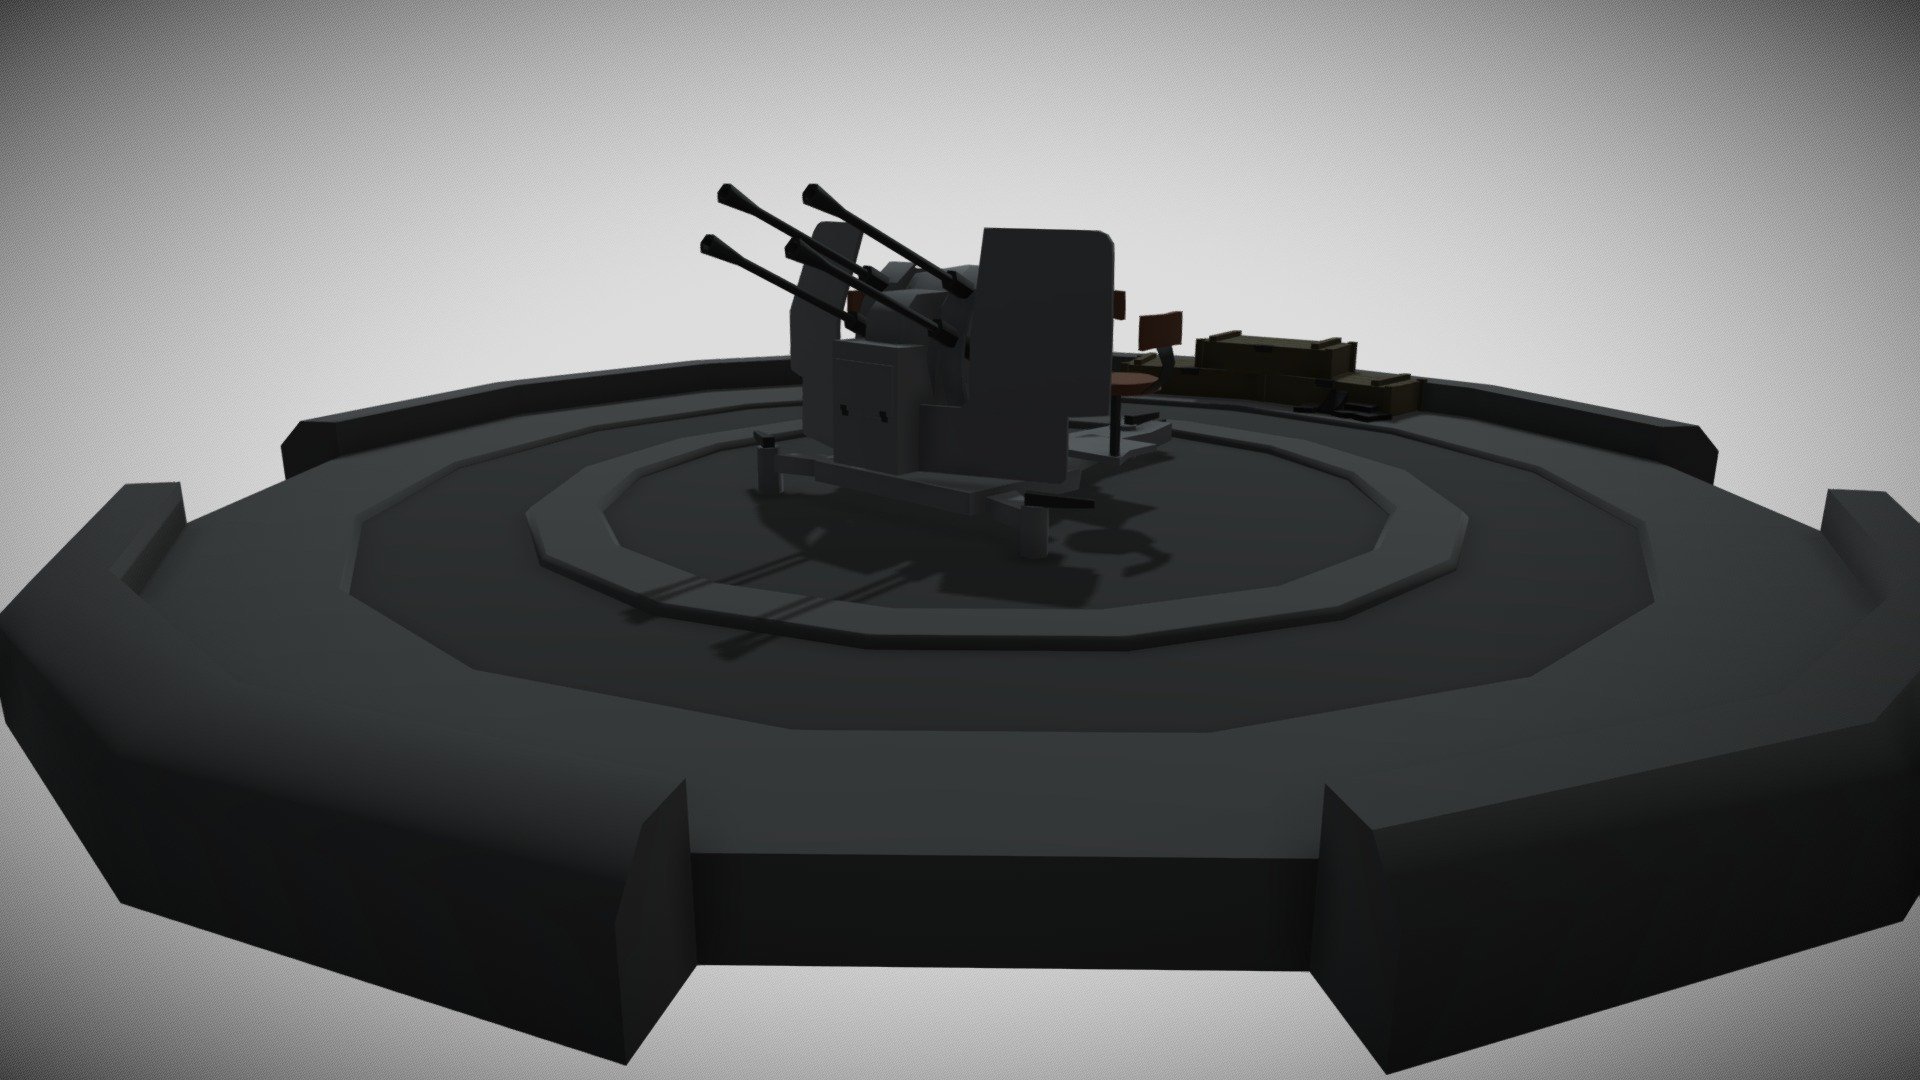 [Low poly scene] 2cm Flakvierling 38

2cm Flak-Vierling 38 - Wehrmacht anti-aircraft gun of the Second World War, consisting of four synchronized barrels of 2 cm Flak 38 anti-aircraft guns. Developed in 1938, the 2 cm Flak 38 was originally used on ships of the navy, but was later adopted in other branches of the Wehrmacht. The Flak-Vierling 38 is an anti-aircraft machine gun of four 2 cm Flak 38. It was widely used as a defensive weapon against low-flying aircraft and light armored vehicles.

This is a ready-made game model in minimal low poly detail on the WW2 theme.
 - [Low poly] 2cm Flakvierling 38 - Download Free 3D model by Stafford (@Emilor) 3d model